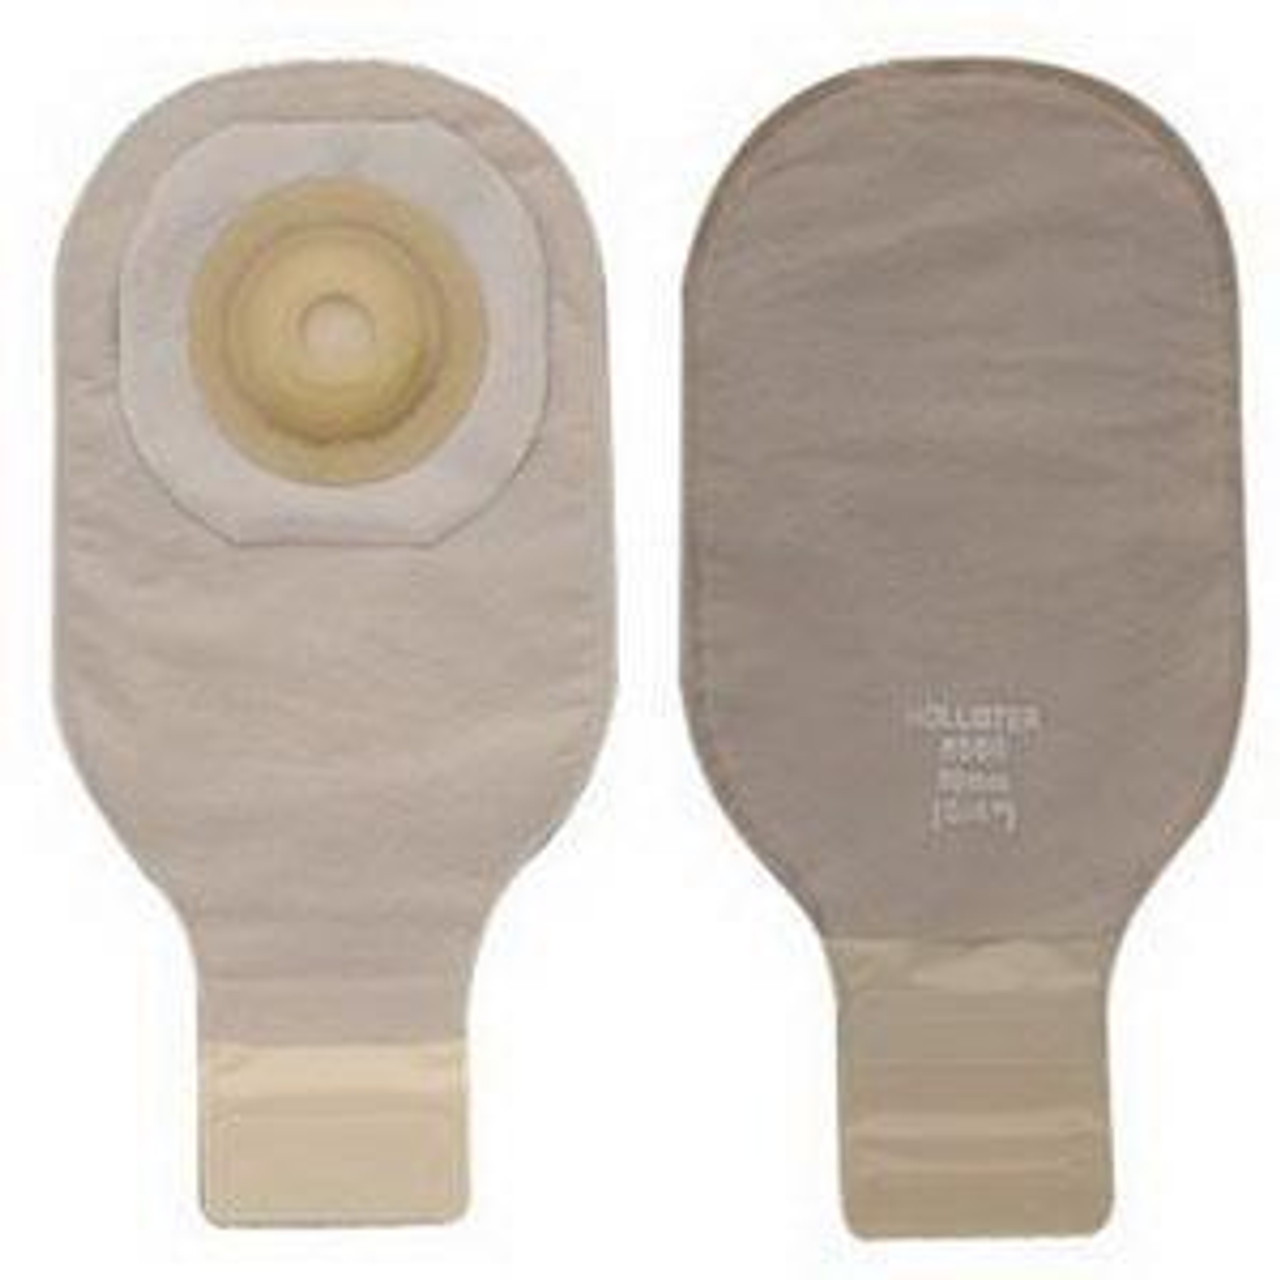 CONVEX Drainable Pouch, Pre-sized 7/8", BEIGE, LOCK-N-ROLL BX/5 (HOL-8591) (Hollister 8591)